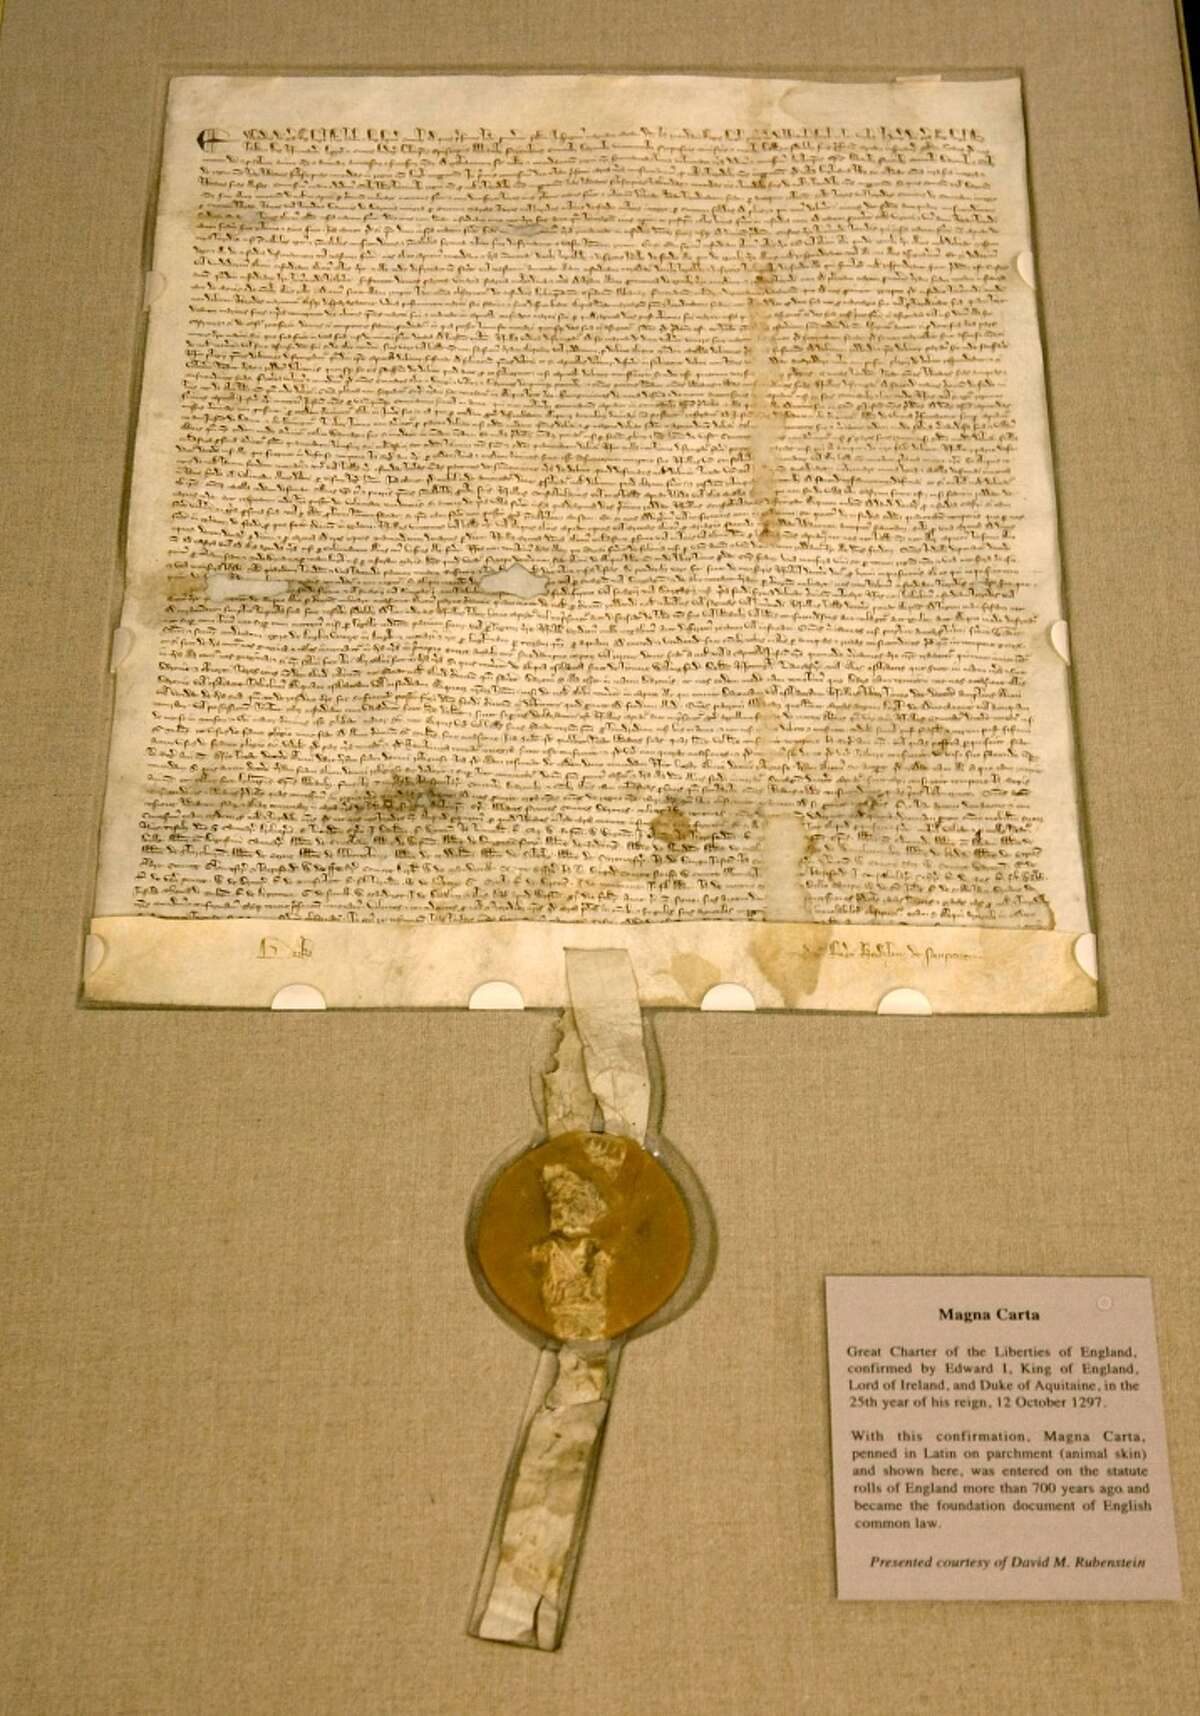 The Magna Carta was signed in 1215, the same year Beijing was captured and burned by the Mongols under the direction of Genghis Khan.  Keep clicking to see surprising events in history happened at around the same time, though you probably had no idea.